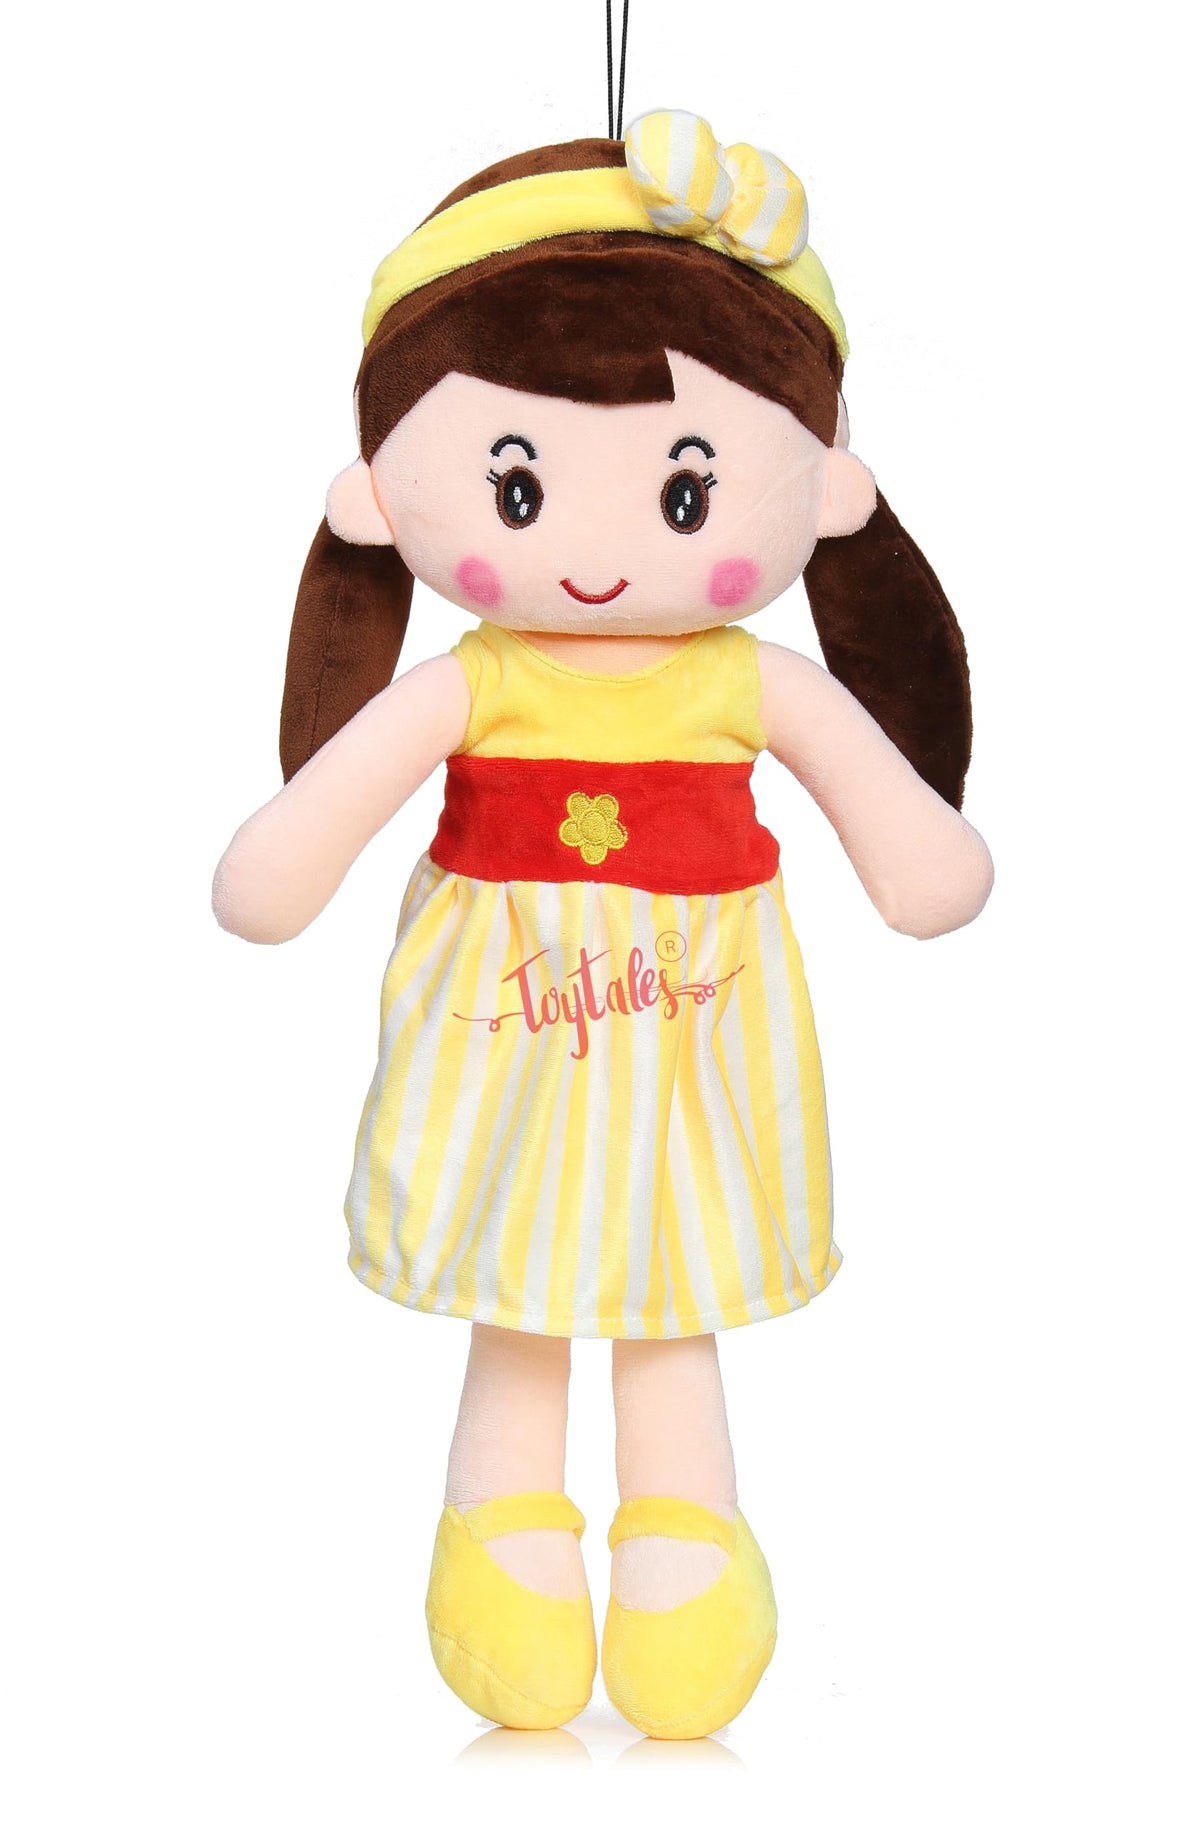 Cute Super Soft Stuffed Doll Big Size 80cm, Cuddly Squishy Dolls, Plush Toy for Baby Girls, Spark Imaginative Play, Safe & Fun Gift for Kids, Perfect for Playtime & Cuddling